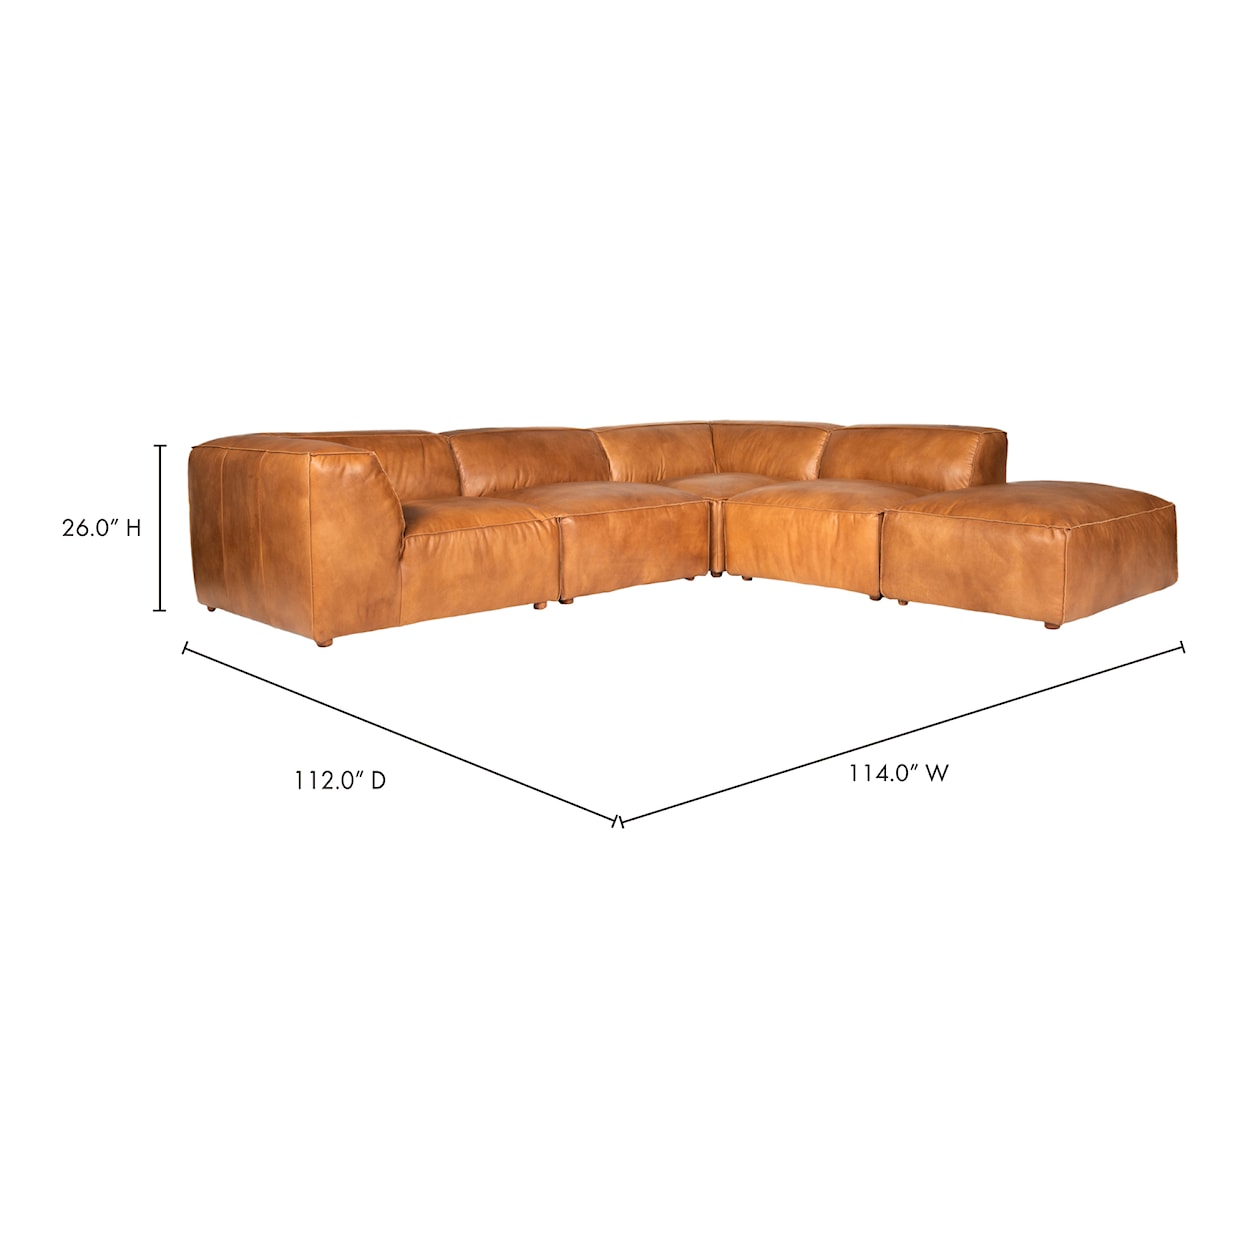 Moe's Home Collection Luxe Luxe Dream Modular Sectional Tan